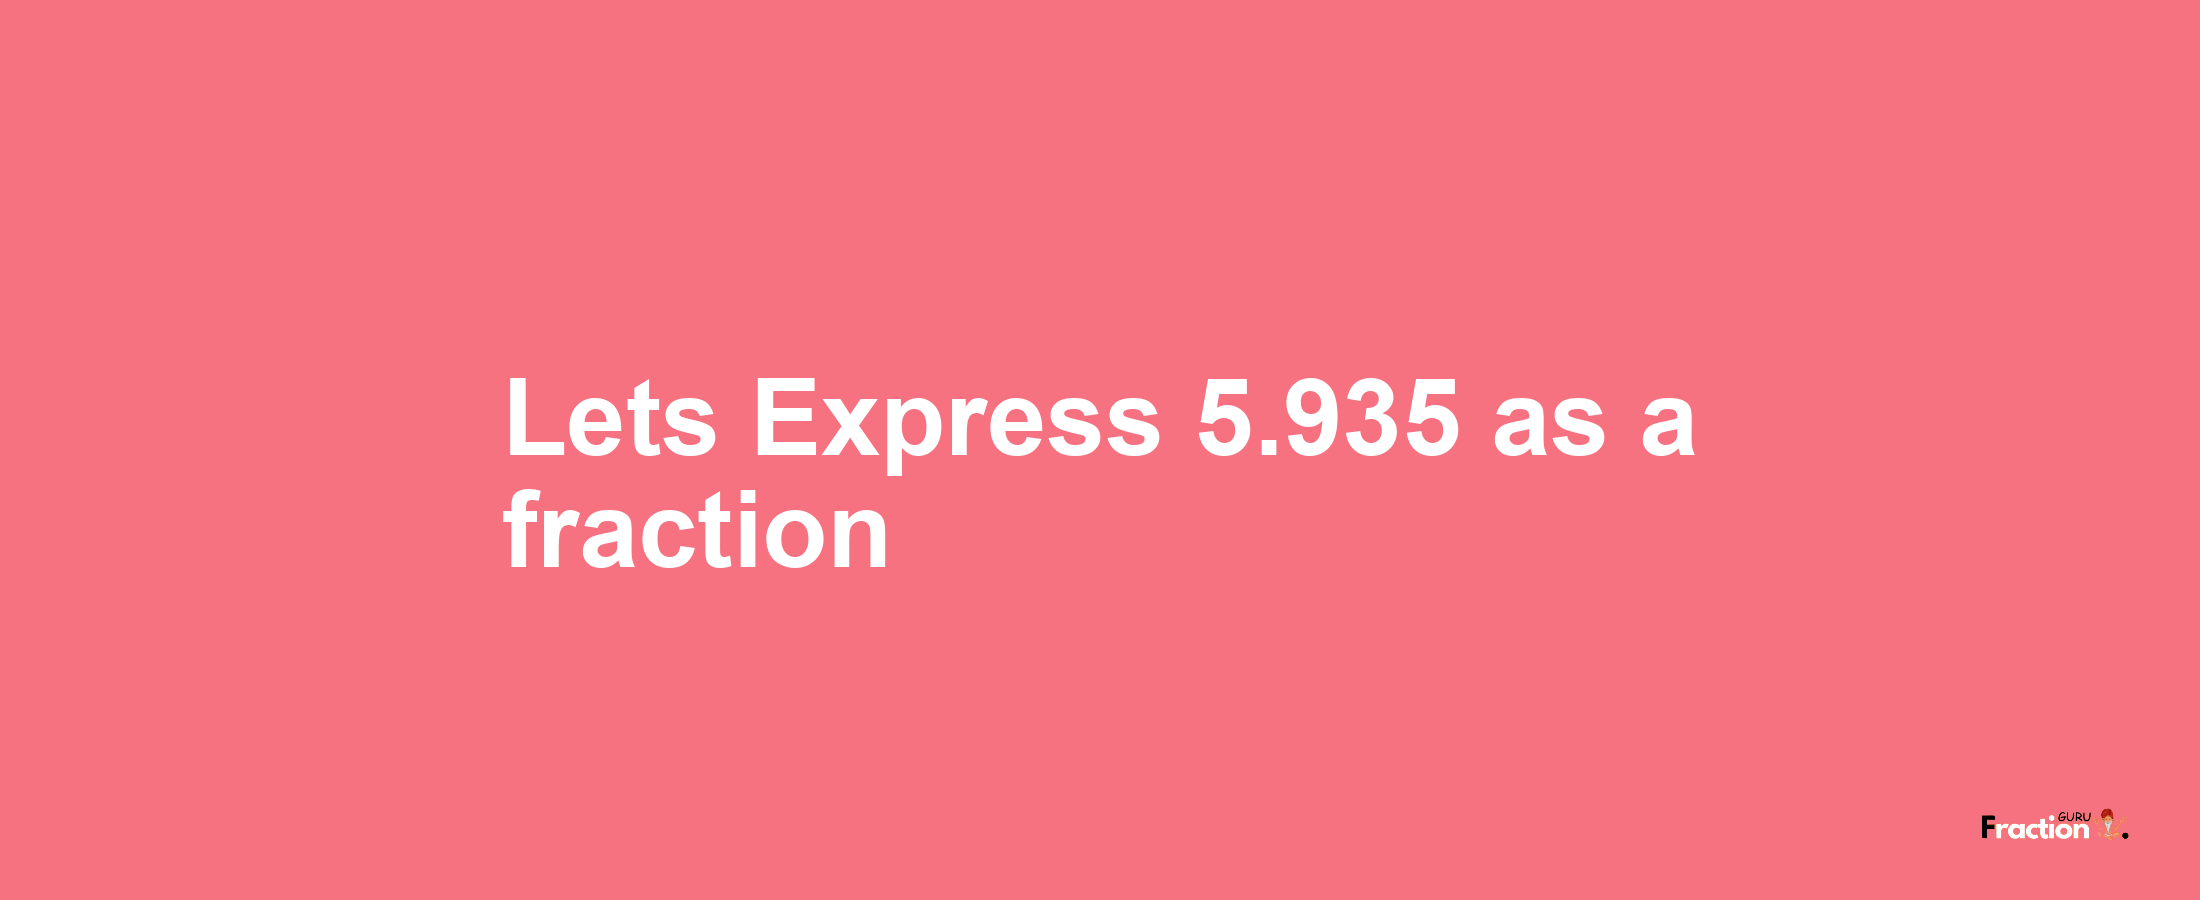 Lets Express 5.935 as afraction